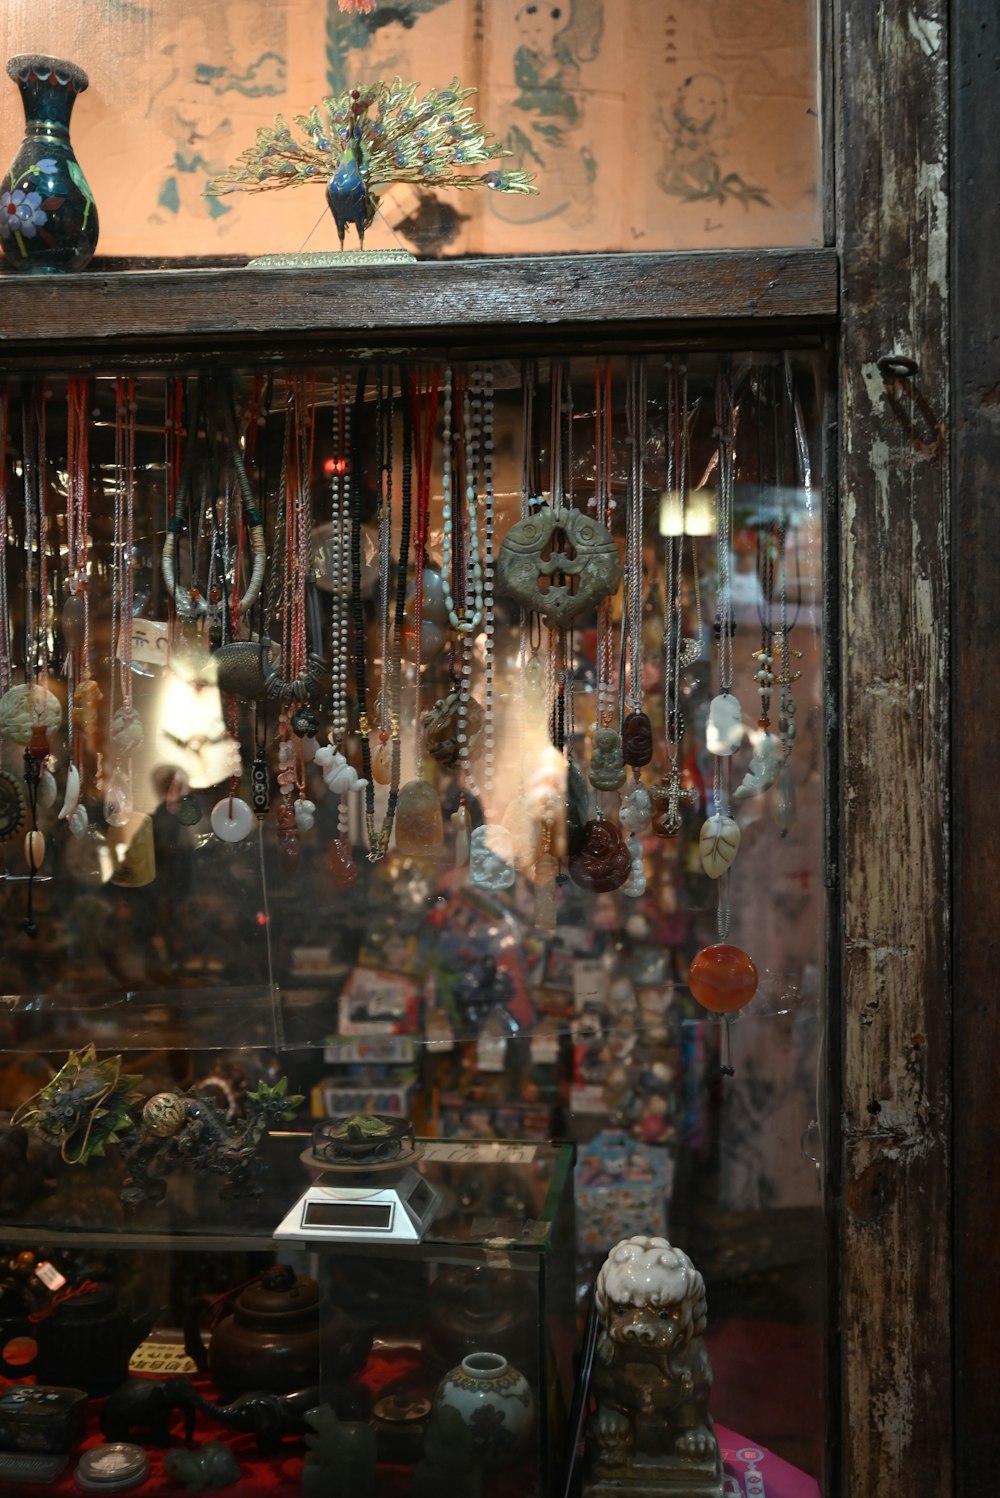 a display case filled with lots of necklaces